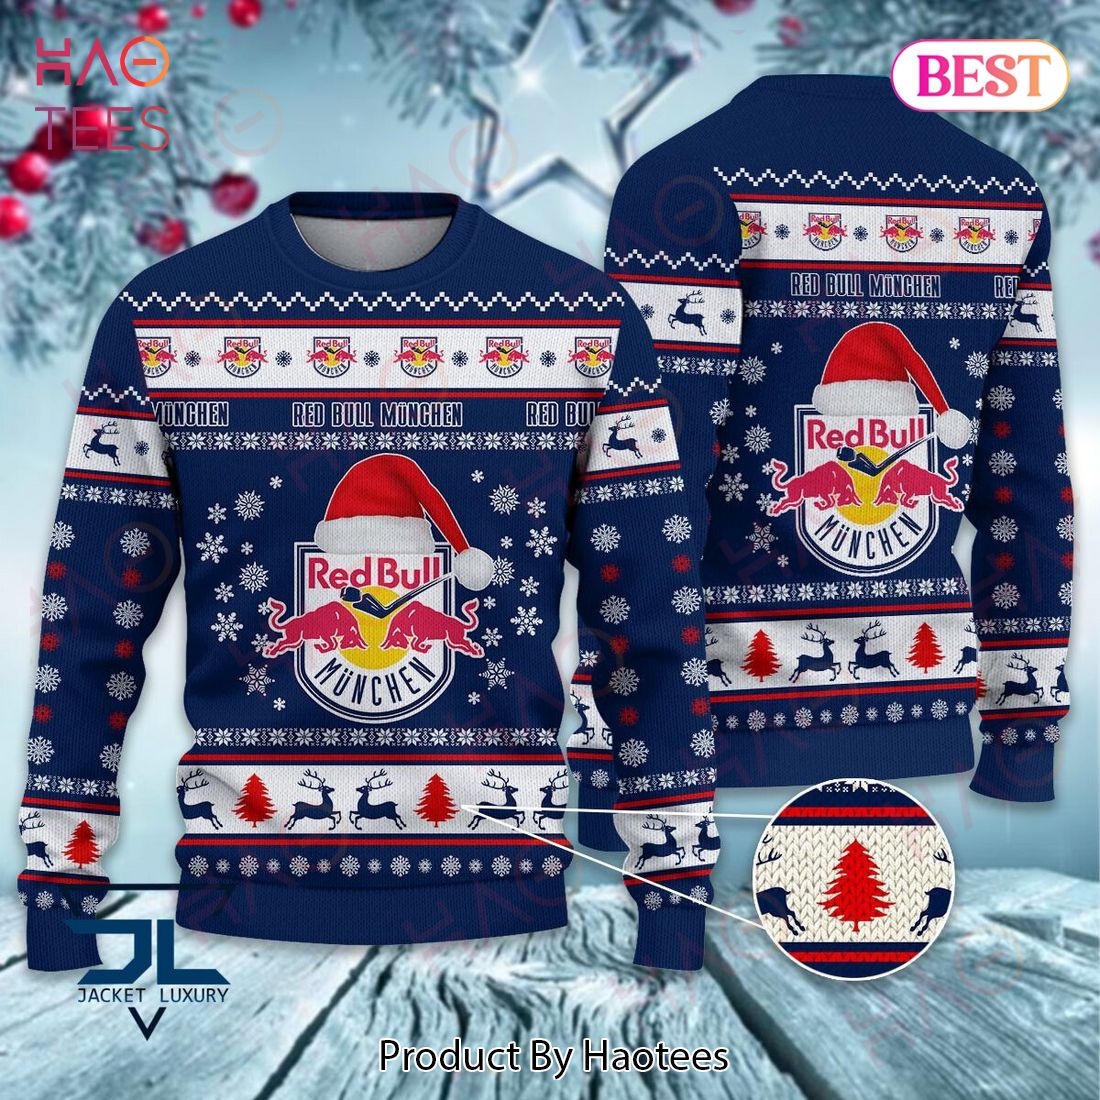 EHC Red Bull Munchen Christmas Luxury Brand Sweater Limited Edition